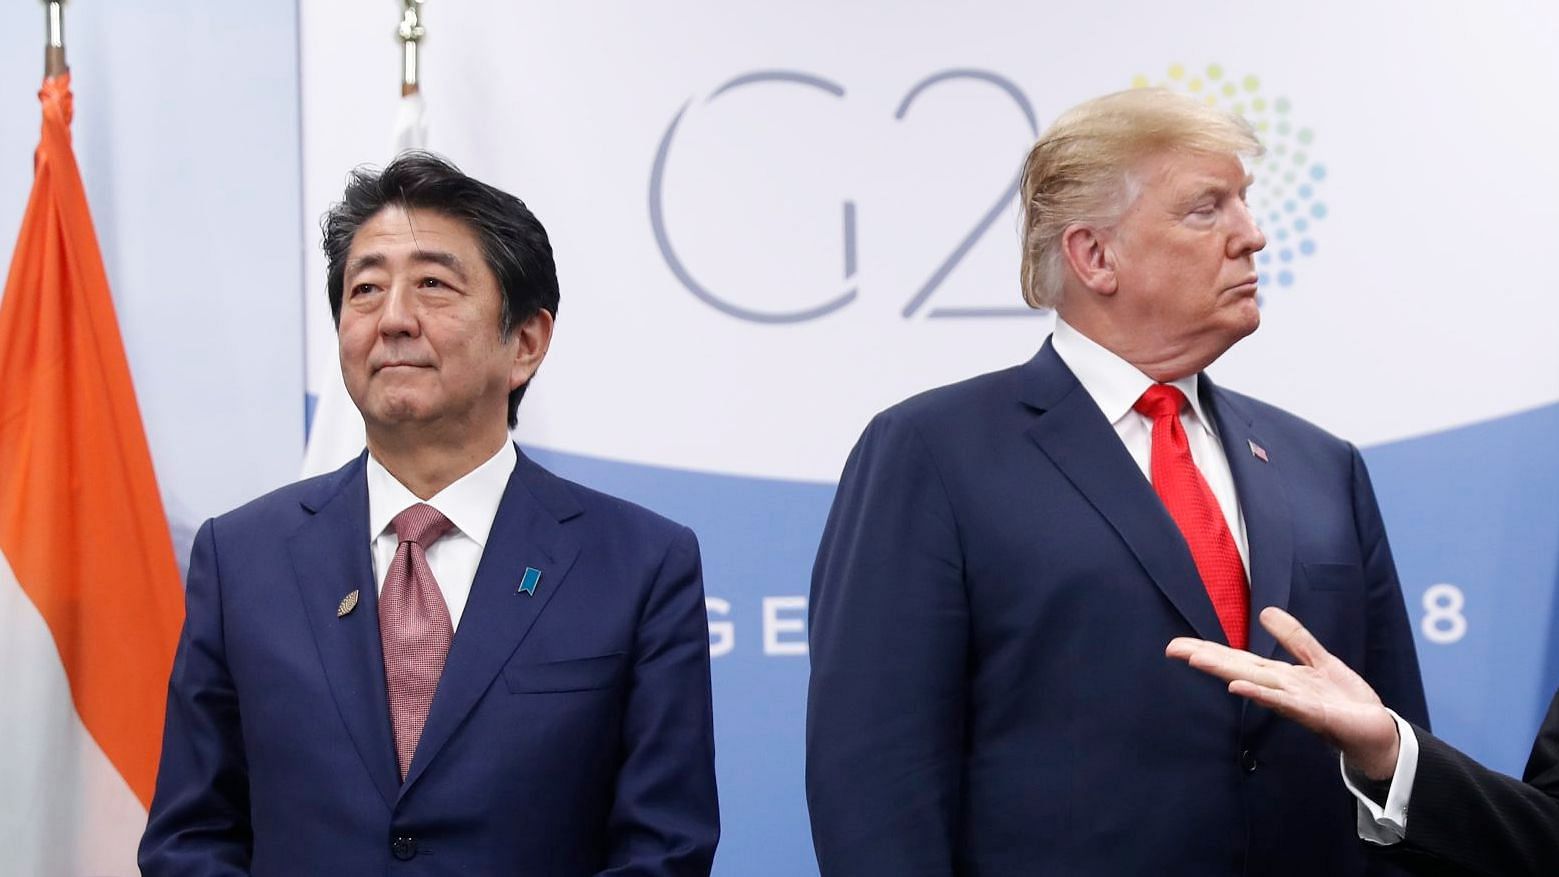 US President Donald Trump meets with Japan’s PM Shinzo Abe at the G20 Summit in Argentina.